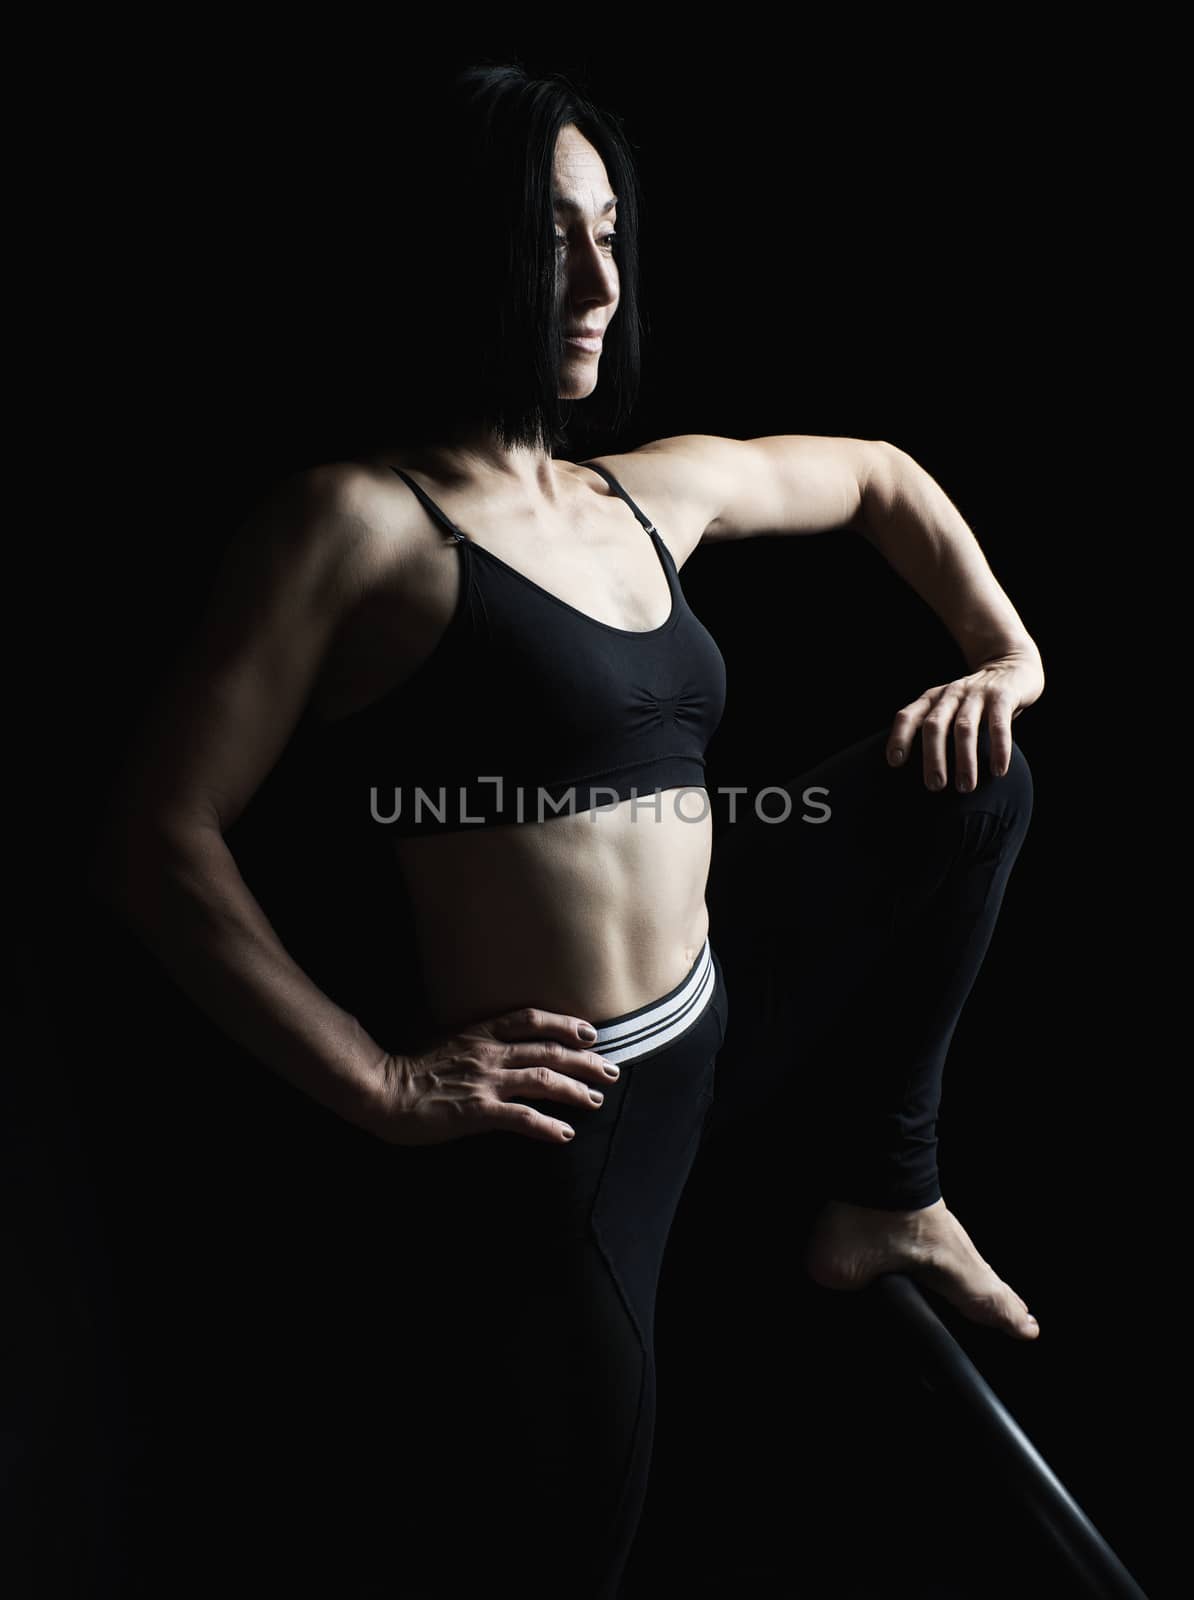 young beautiful athletic girl with muscles in black uniform posing sideways, leg raised up, studio photo in low key